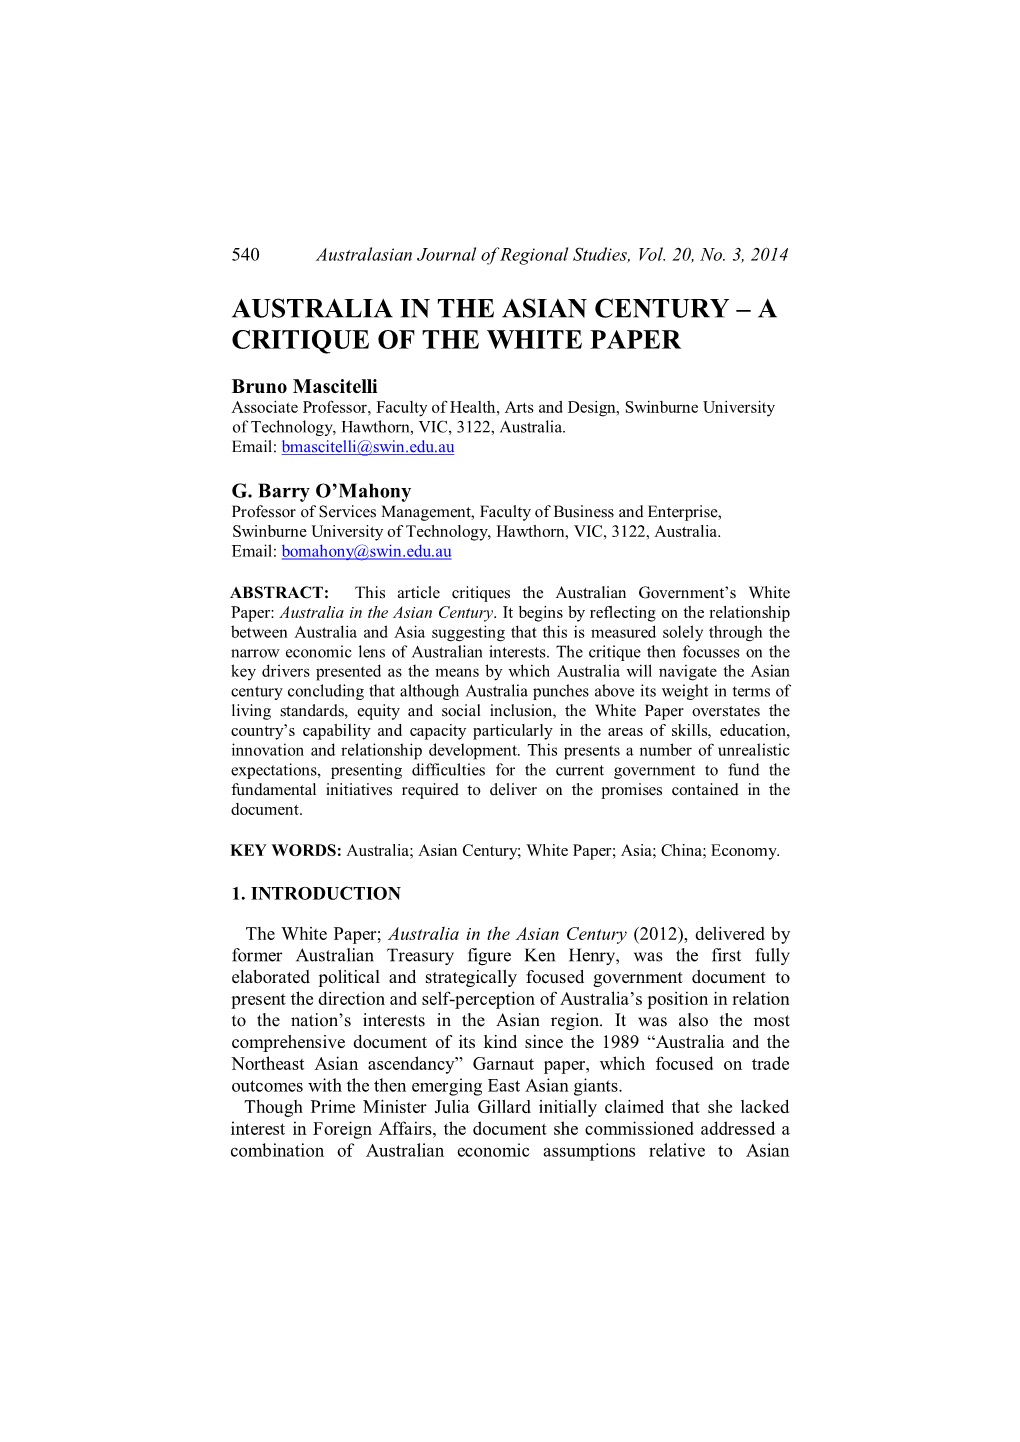 Australia in the Asian Century – a Critique of the White Paper